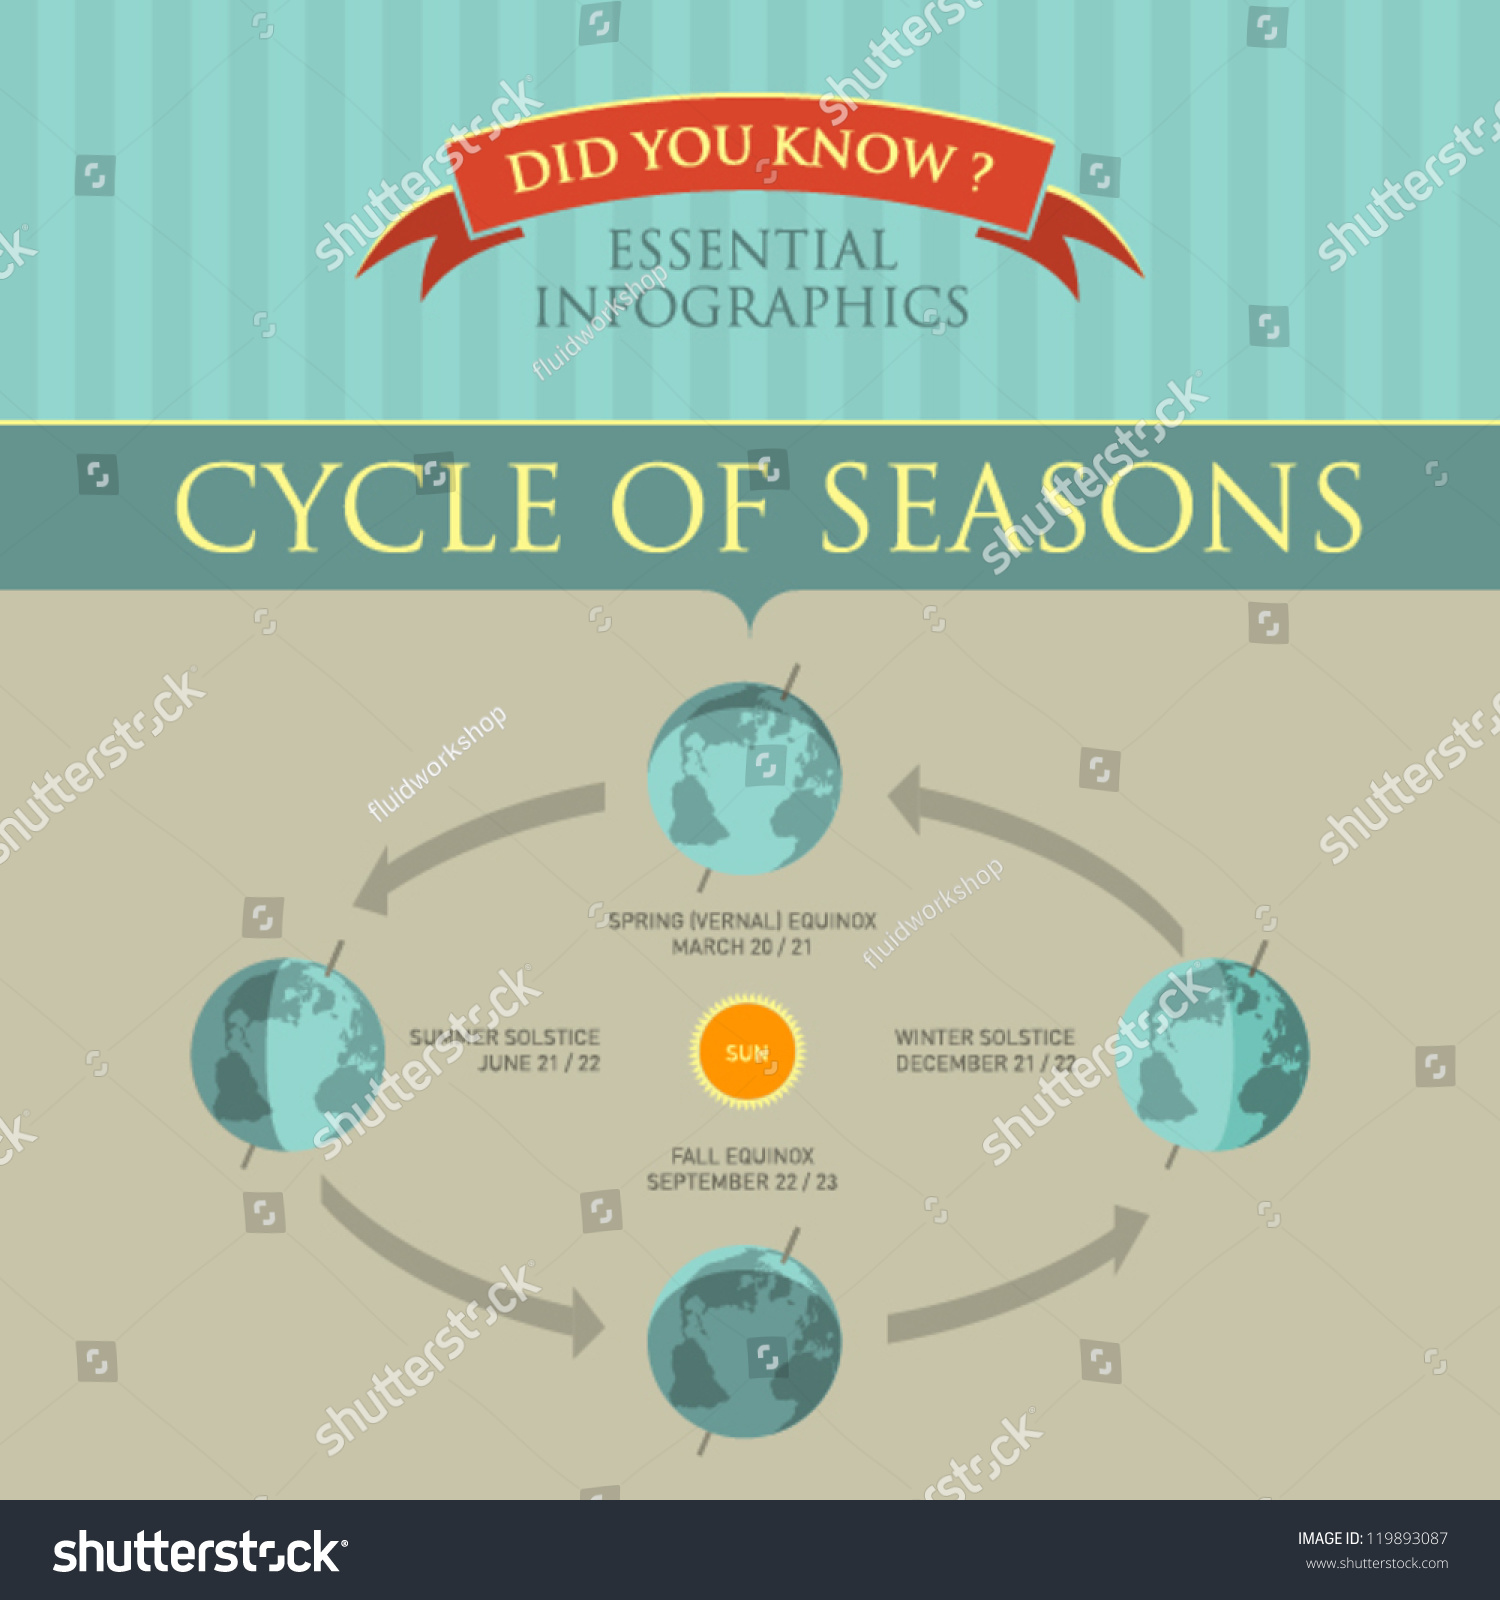 Vector Infographic - Cycle Of Seasons - 119893087 : Shutterstock